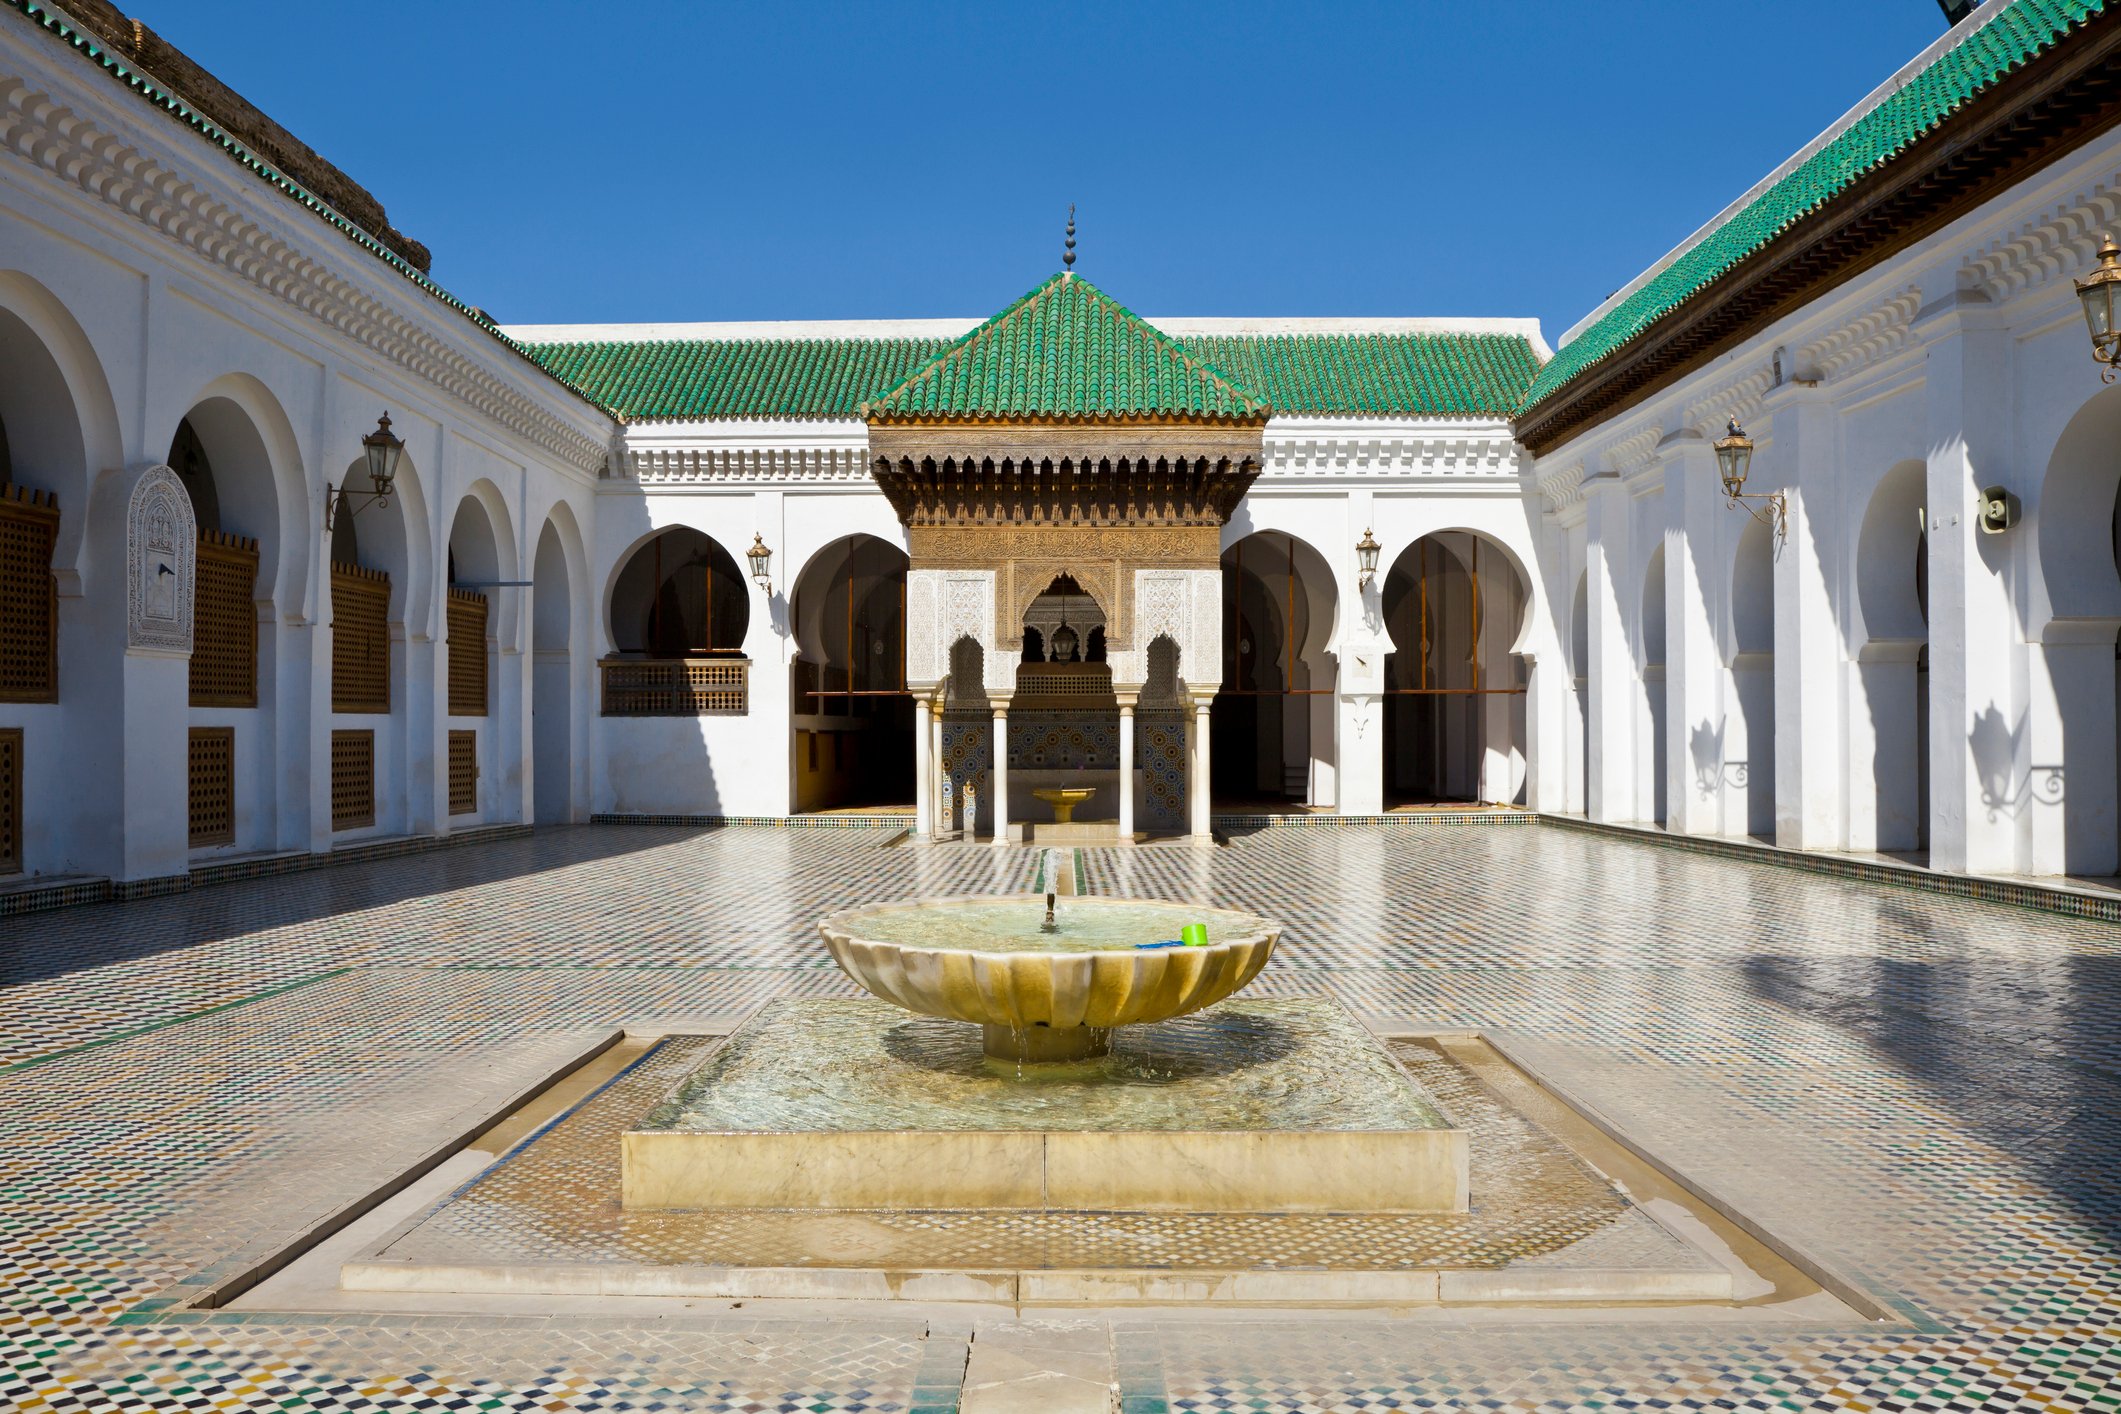 The university was founded by a Tunisian woman named Fatima Al-Fihri, the daughter of a rich merchant. (iStock Photo)